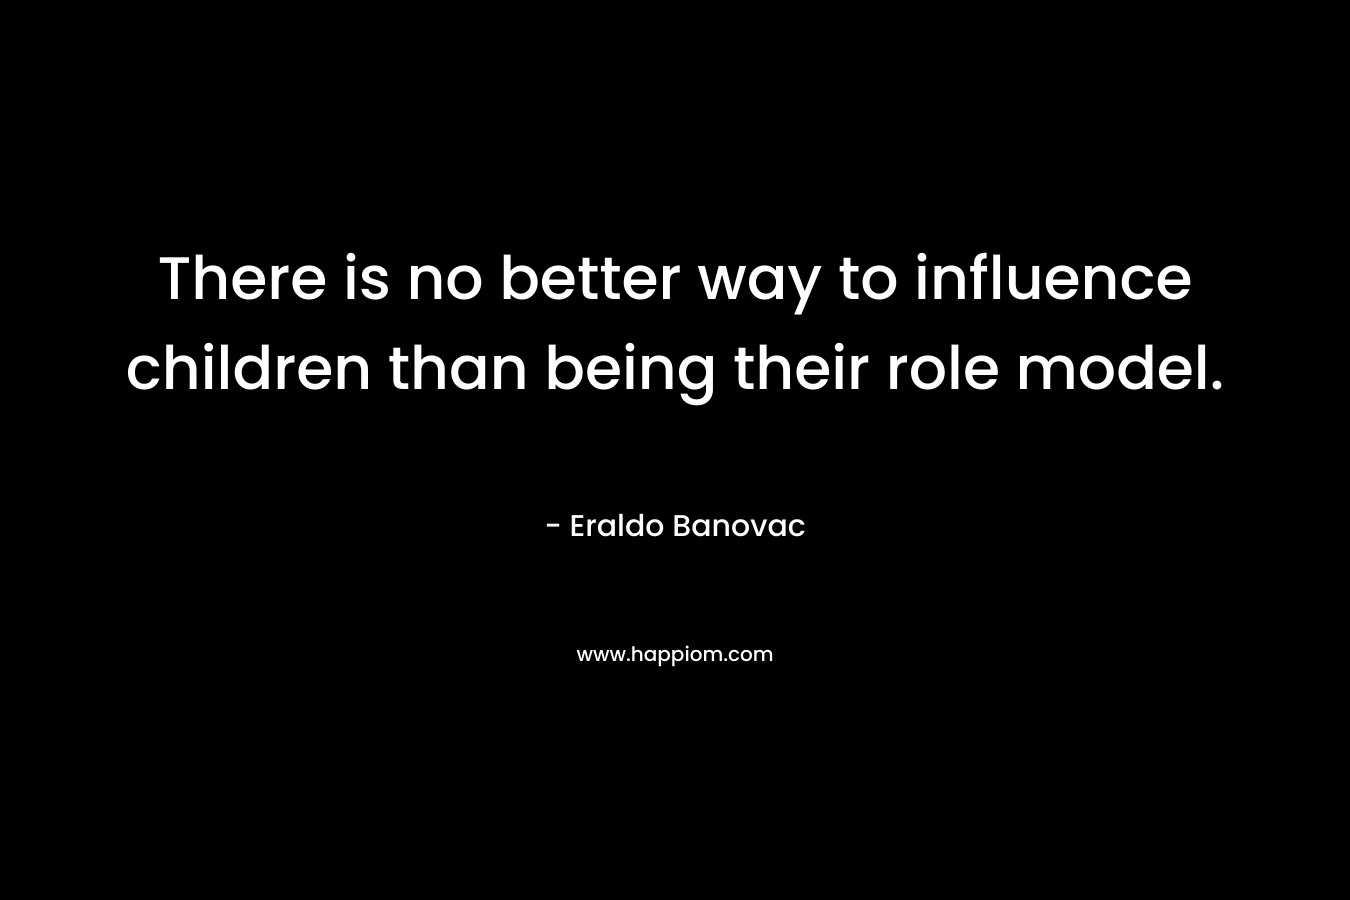 There is no better way to influence children than being their role model.